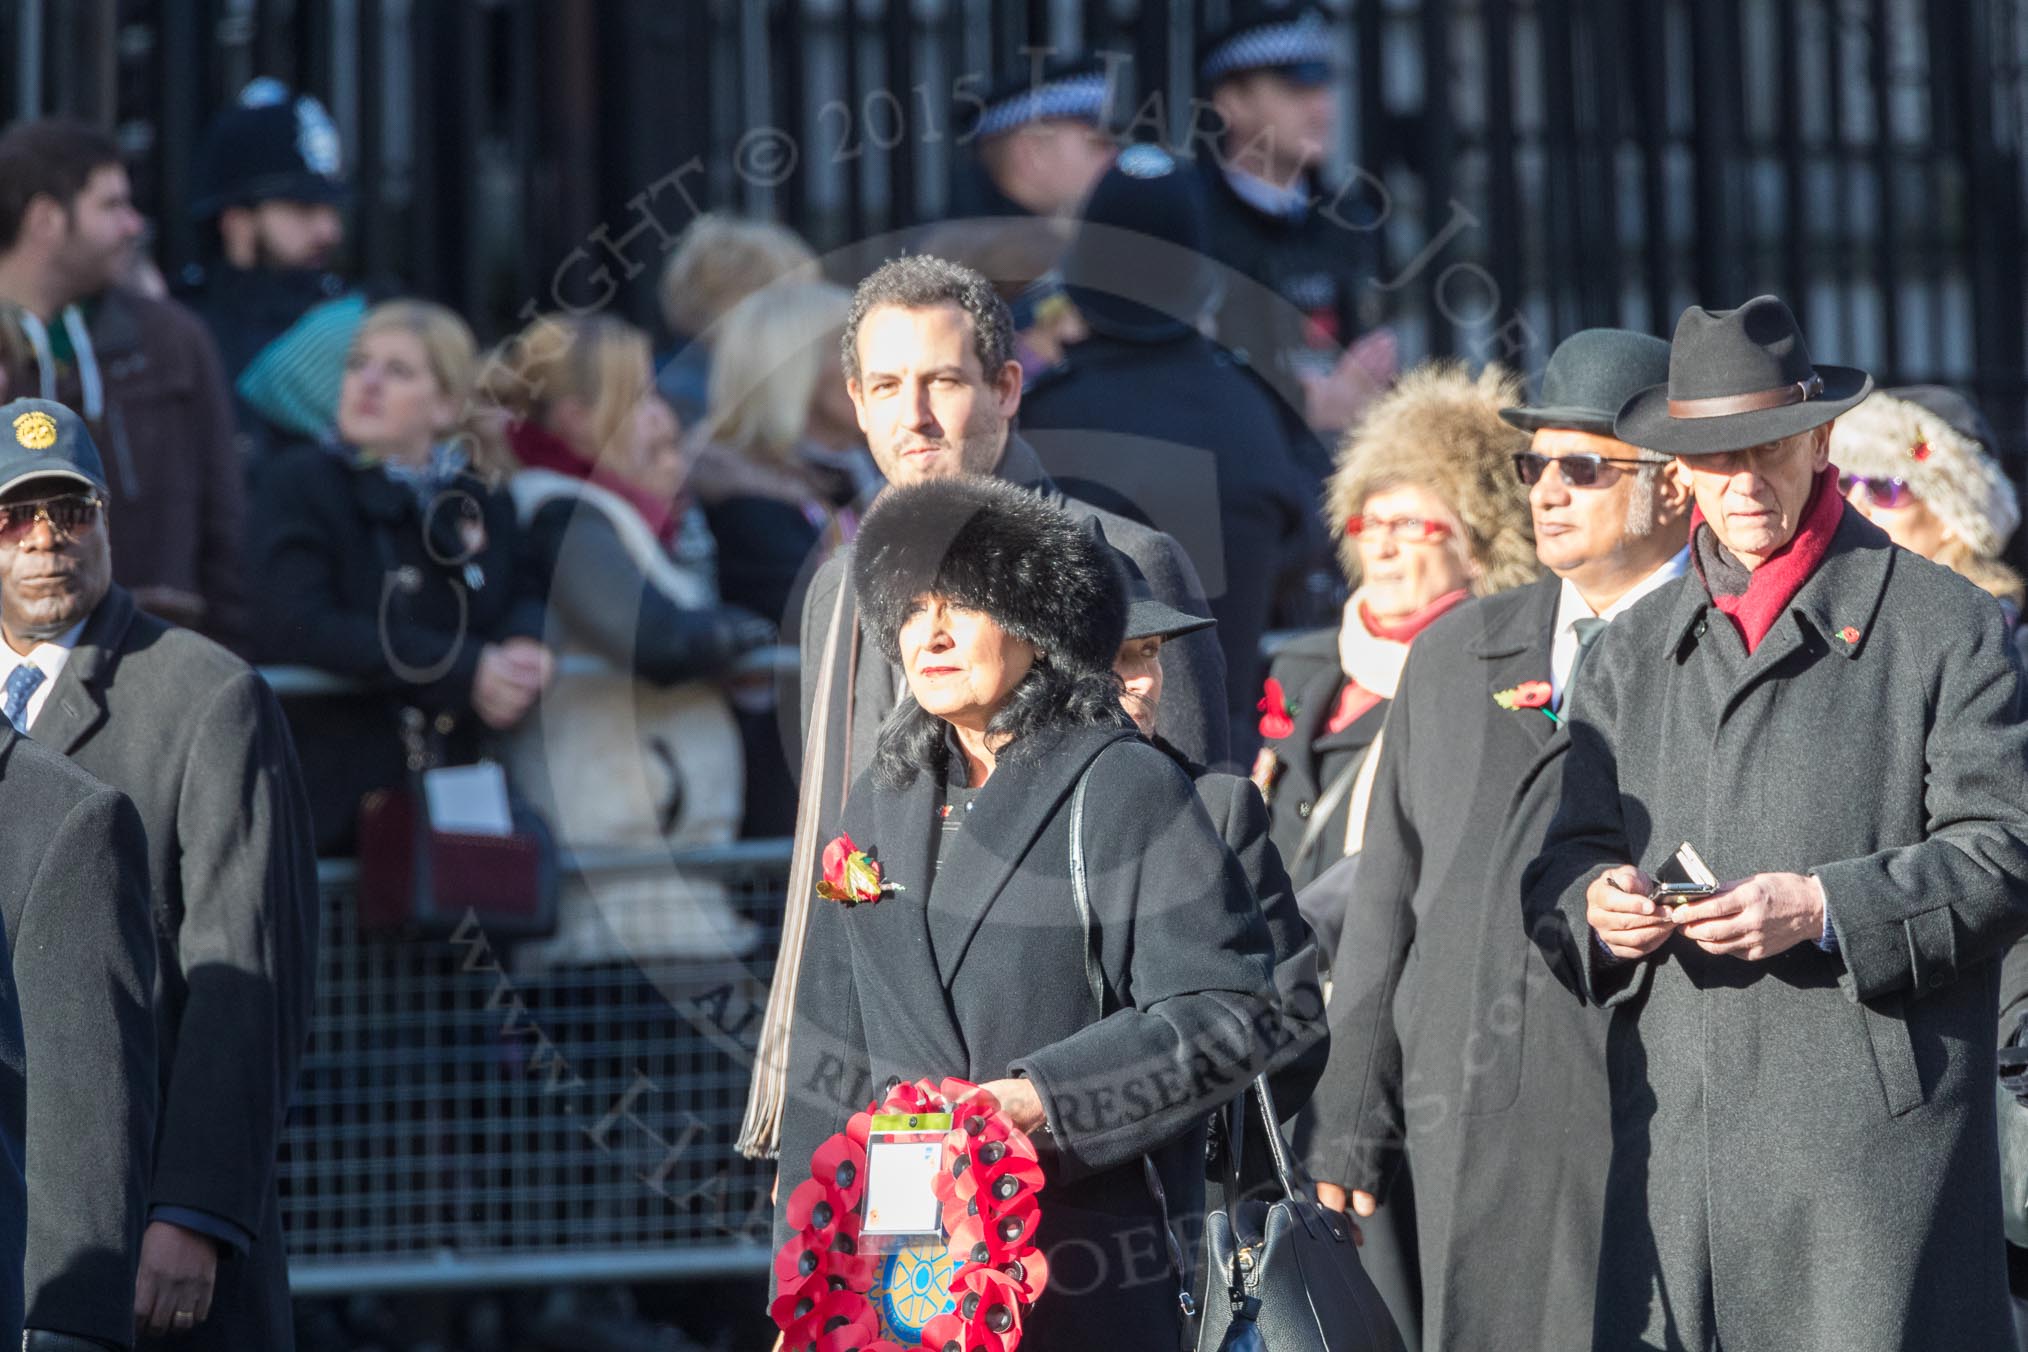 March Past, Remembrance Sunday at the Cenotaph 2016: M29 Rotary International.
Cenotaph, Whitehall, London SW1,
London,
Greater London,
United Kingdom,
on 13 November 2016 at 13:17, image #2757